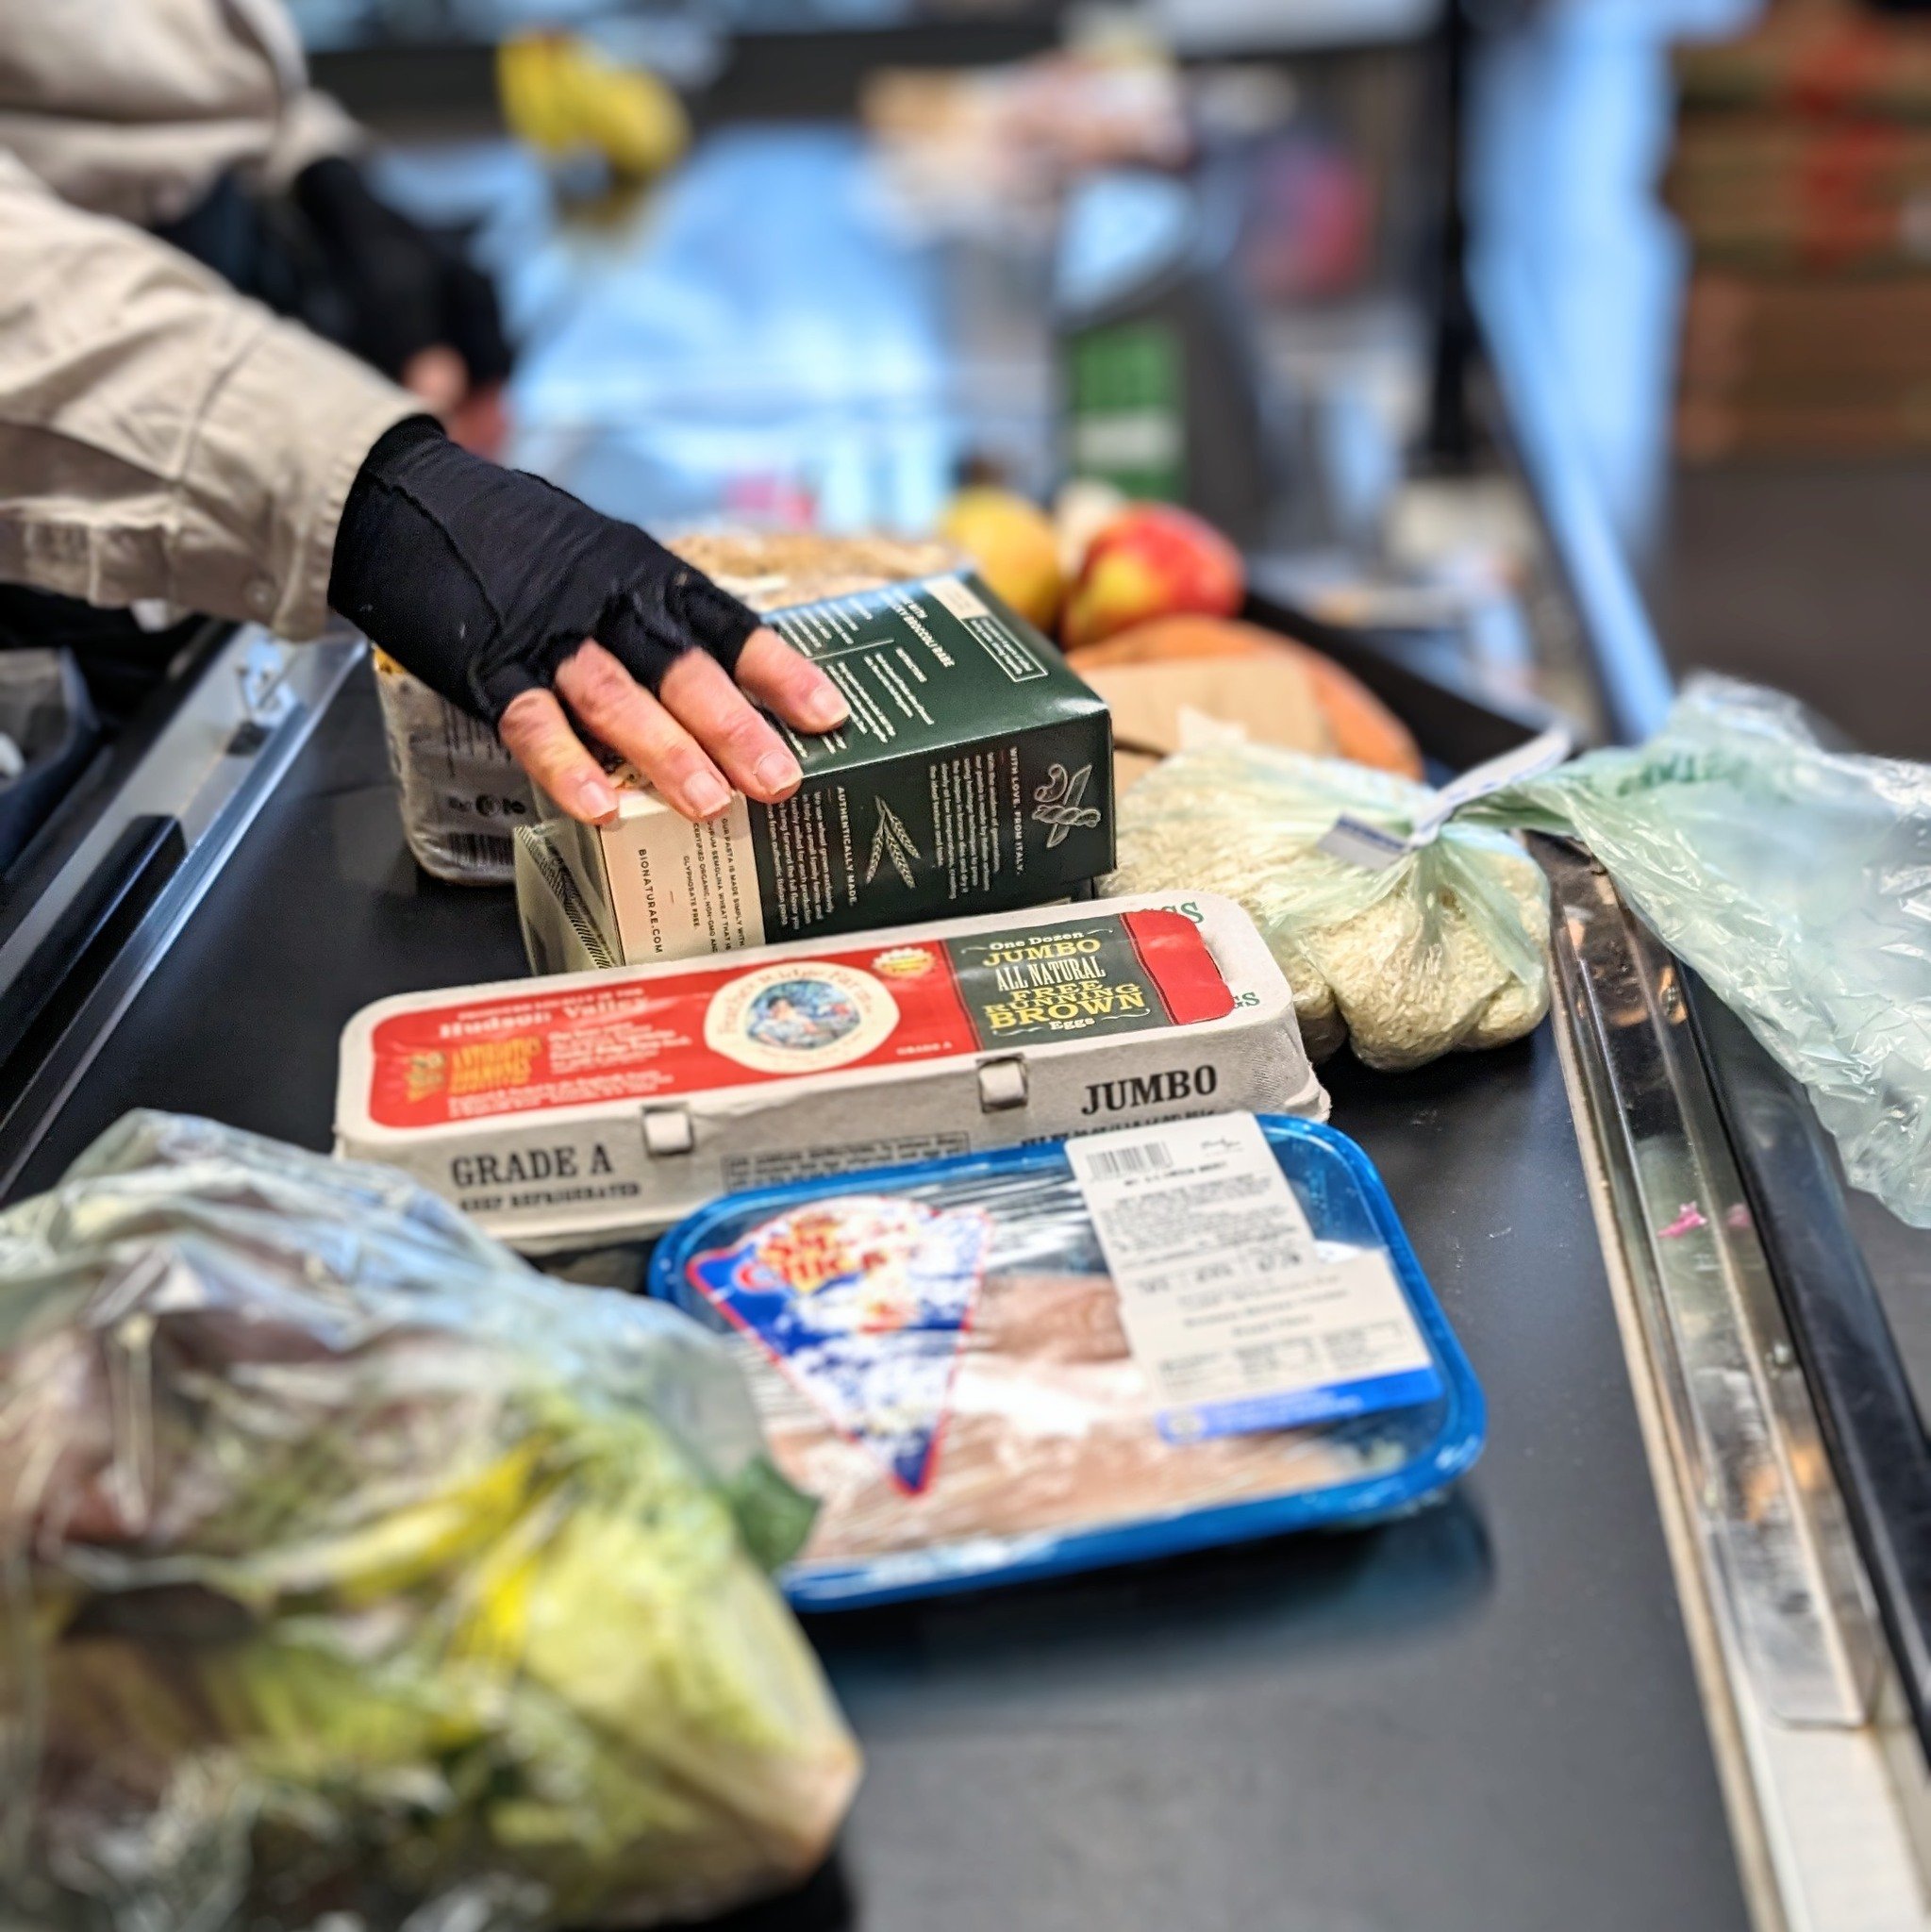 The Co-op is the only place you'll find your entire shopping list AND happy &amp; friendly staff members helping you every step of the way! That's why we're here and why we'll stay.